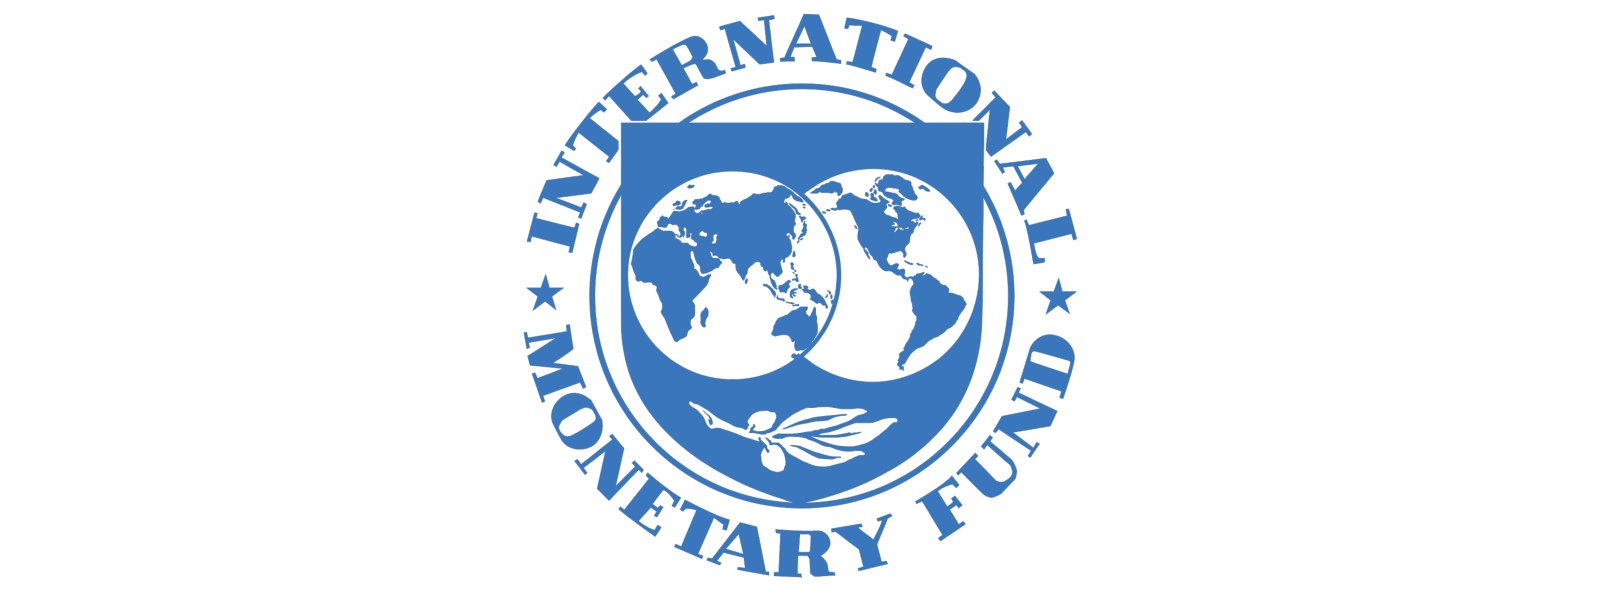 IMF team assures support to overcome current economic crisis